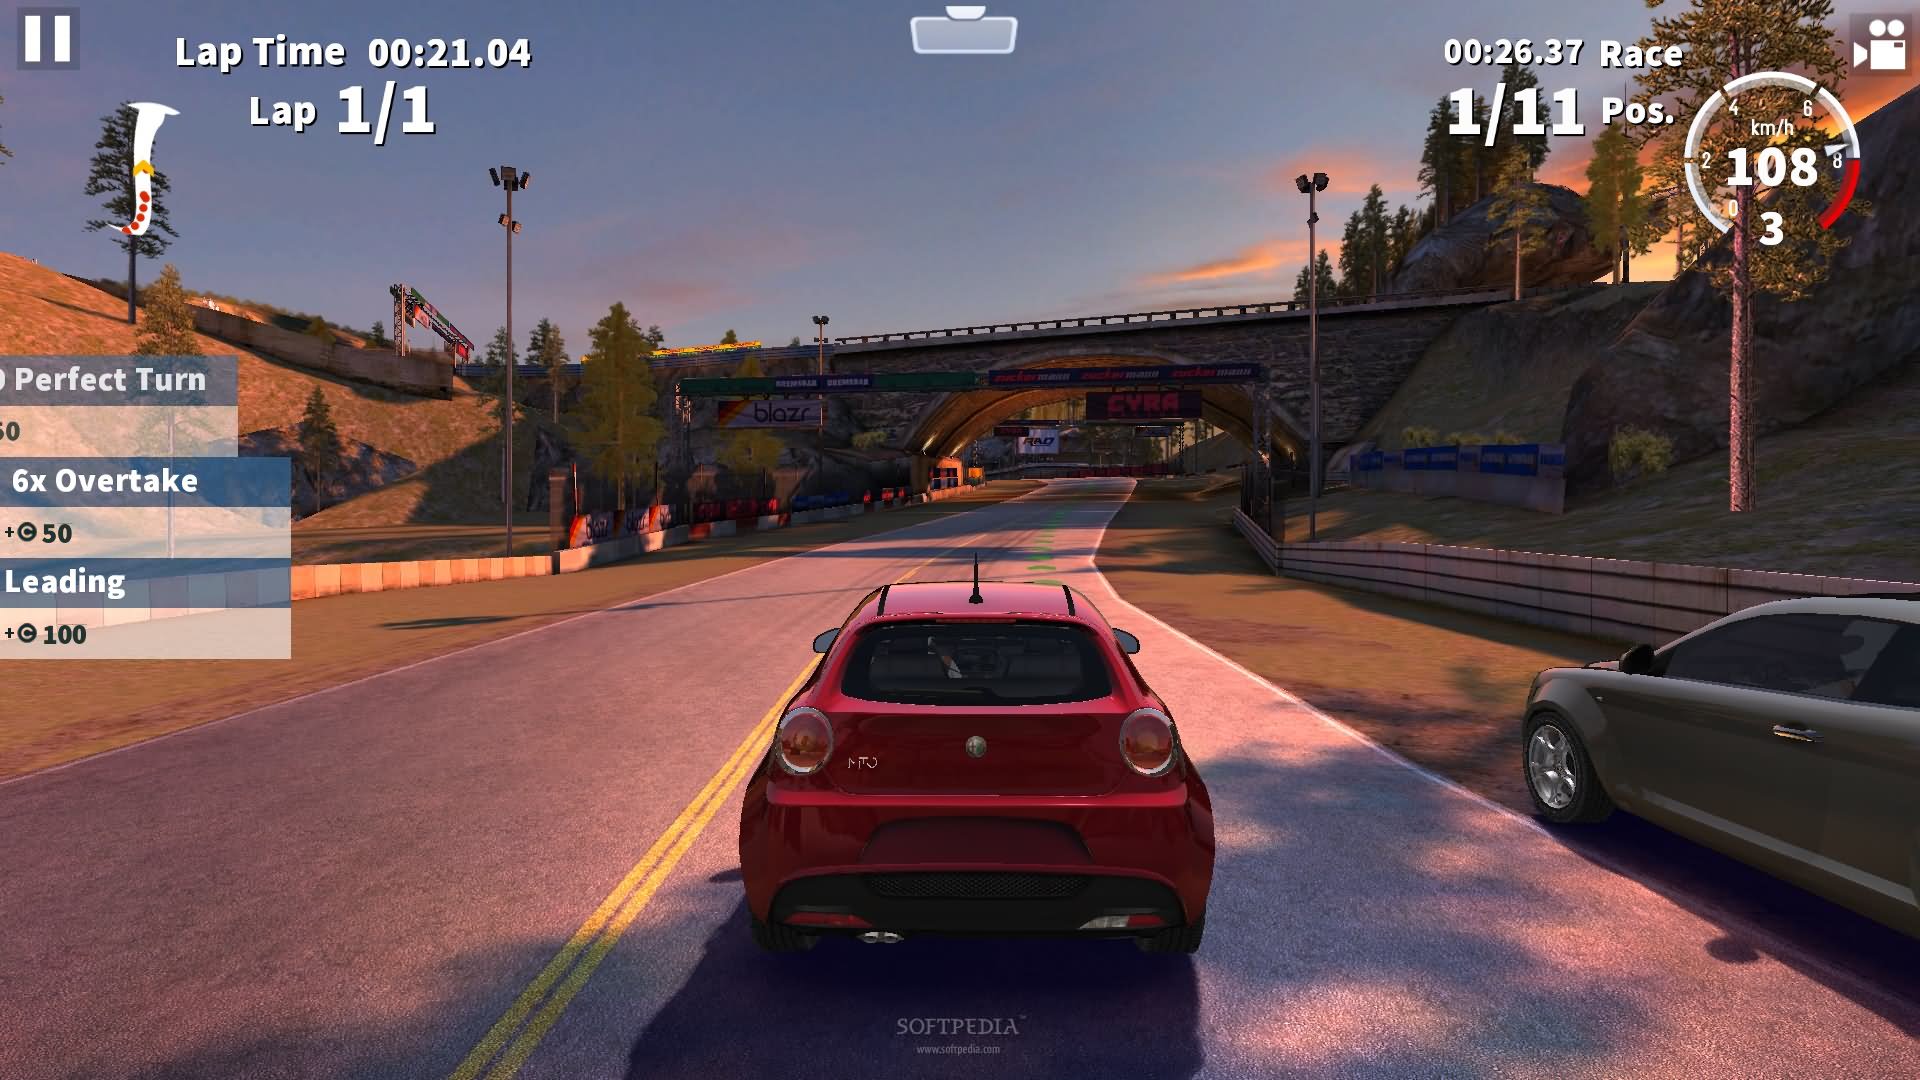 gt racing 2 game free download for pc windows 10